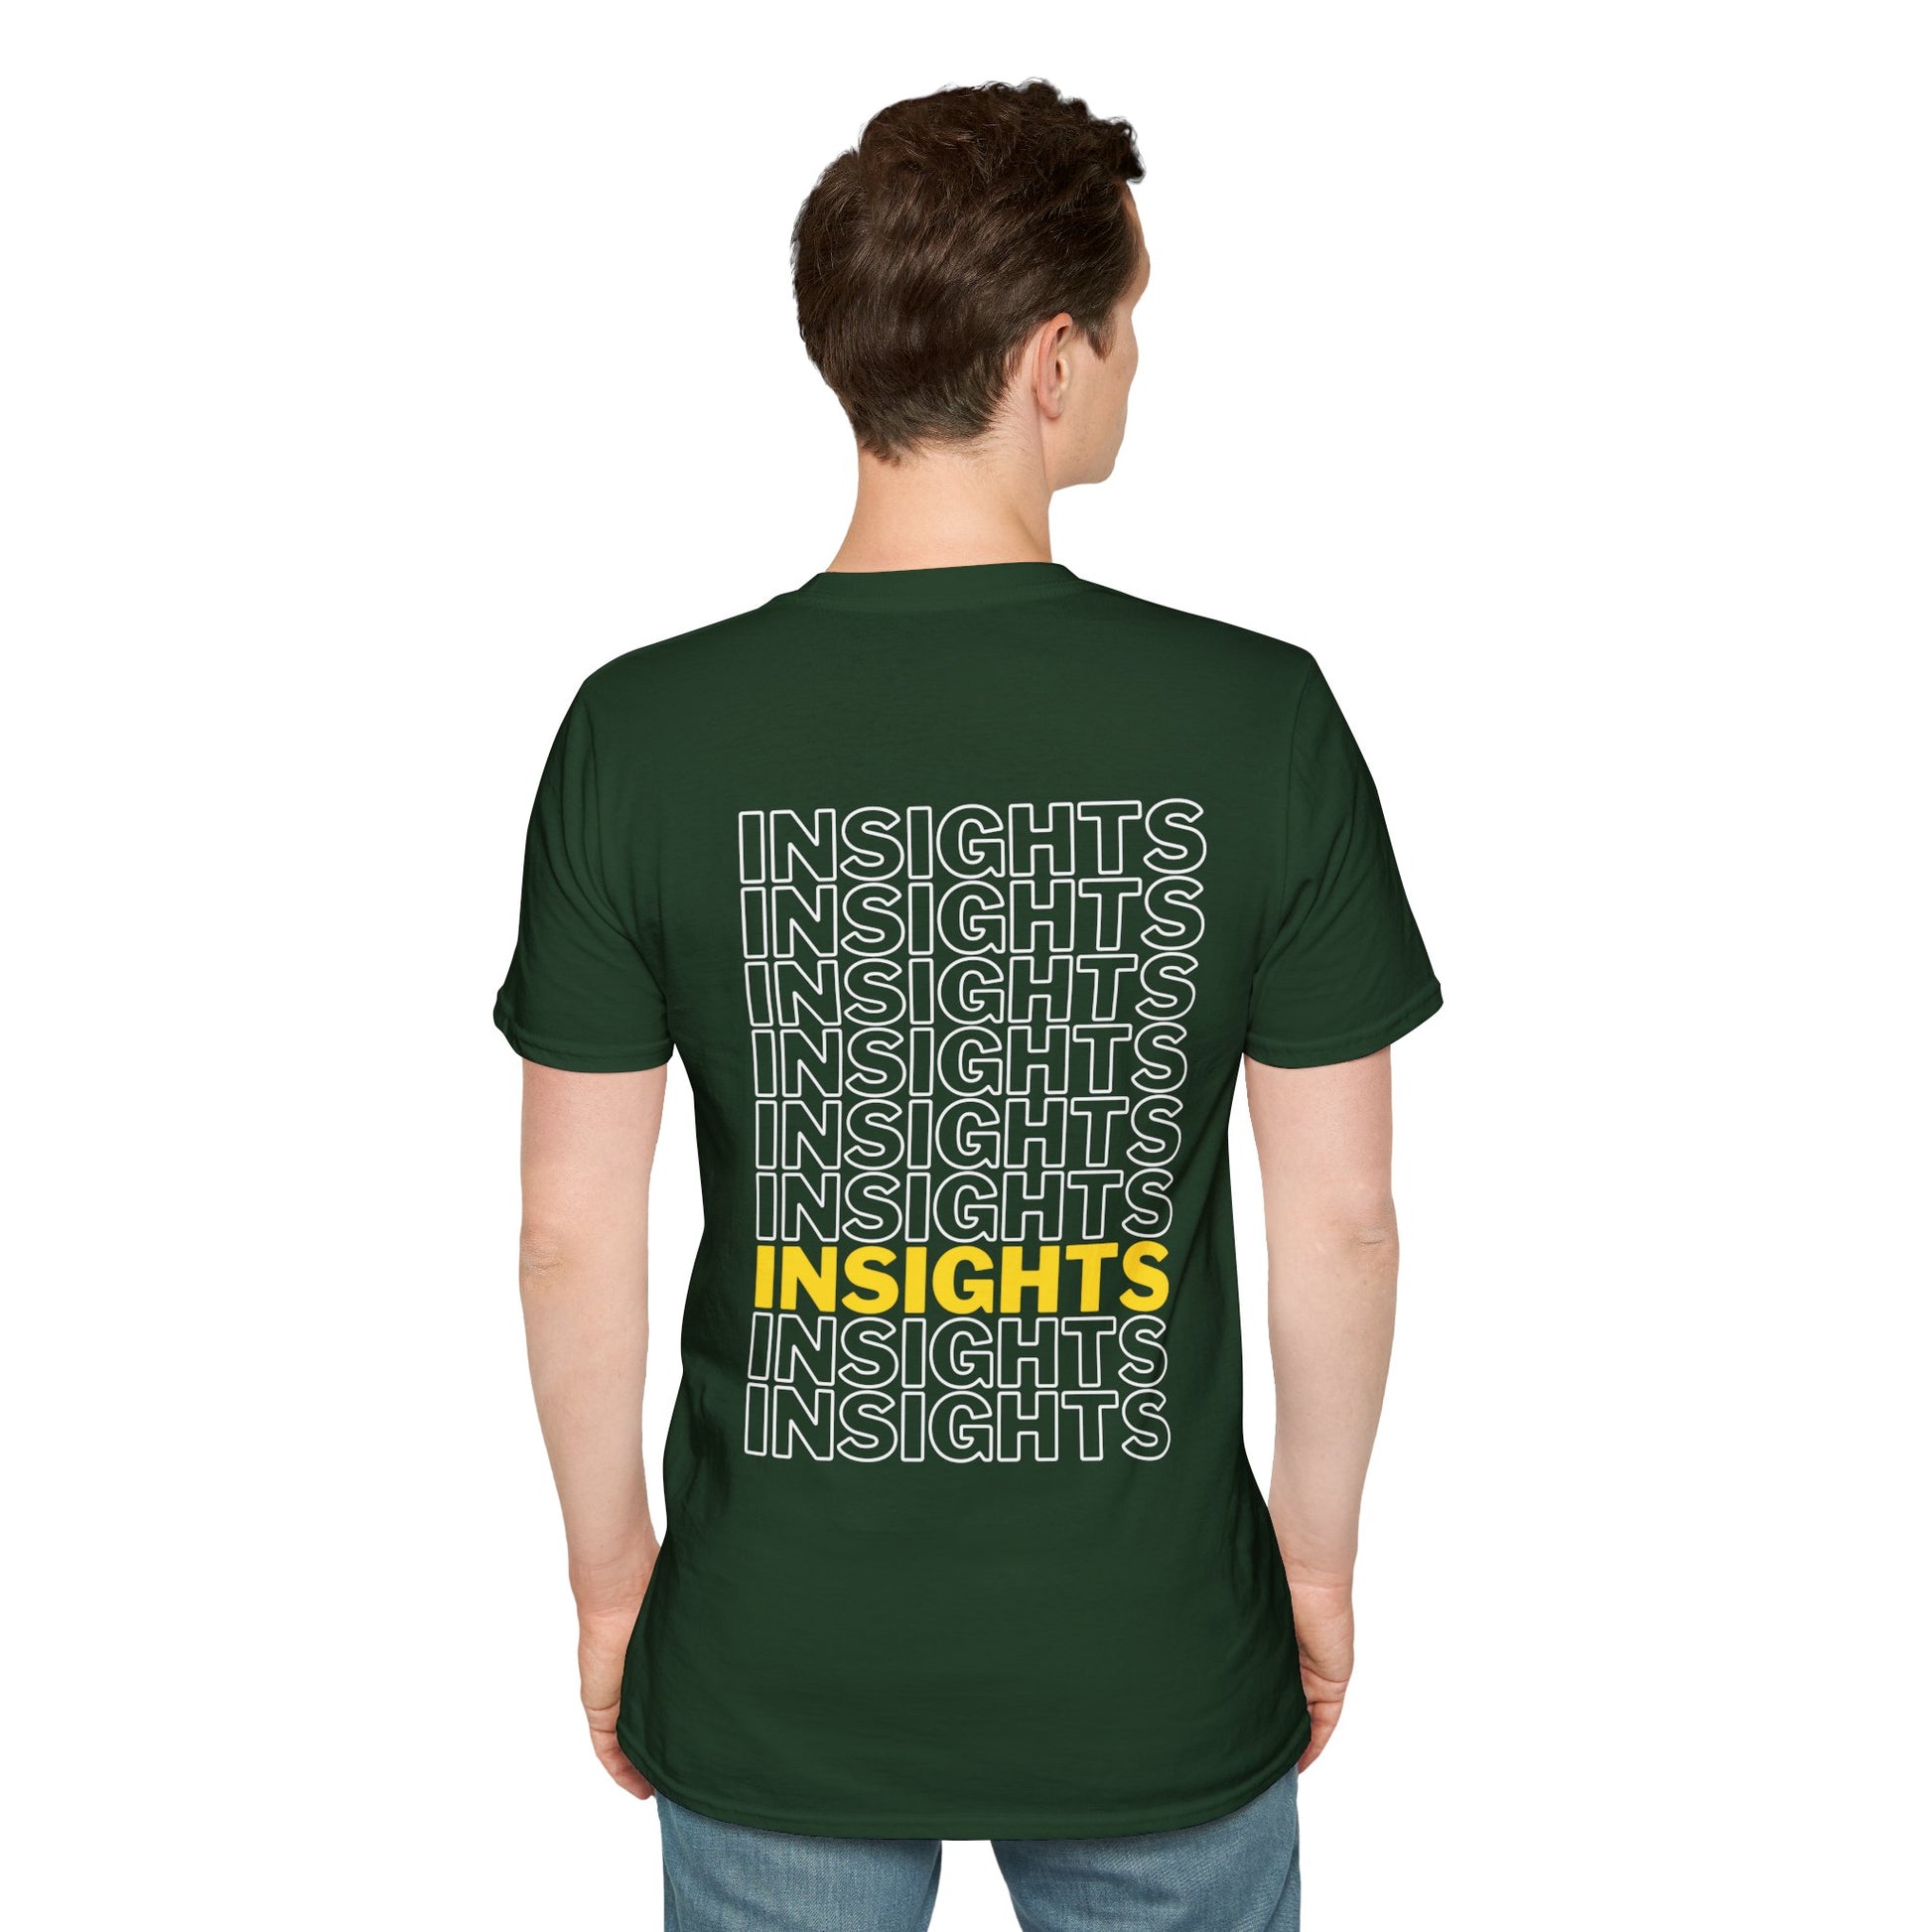 Green T-shirt with the word ‘INSIGHTS’ repeated in white text and one instance highlighted in yellow